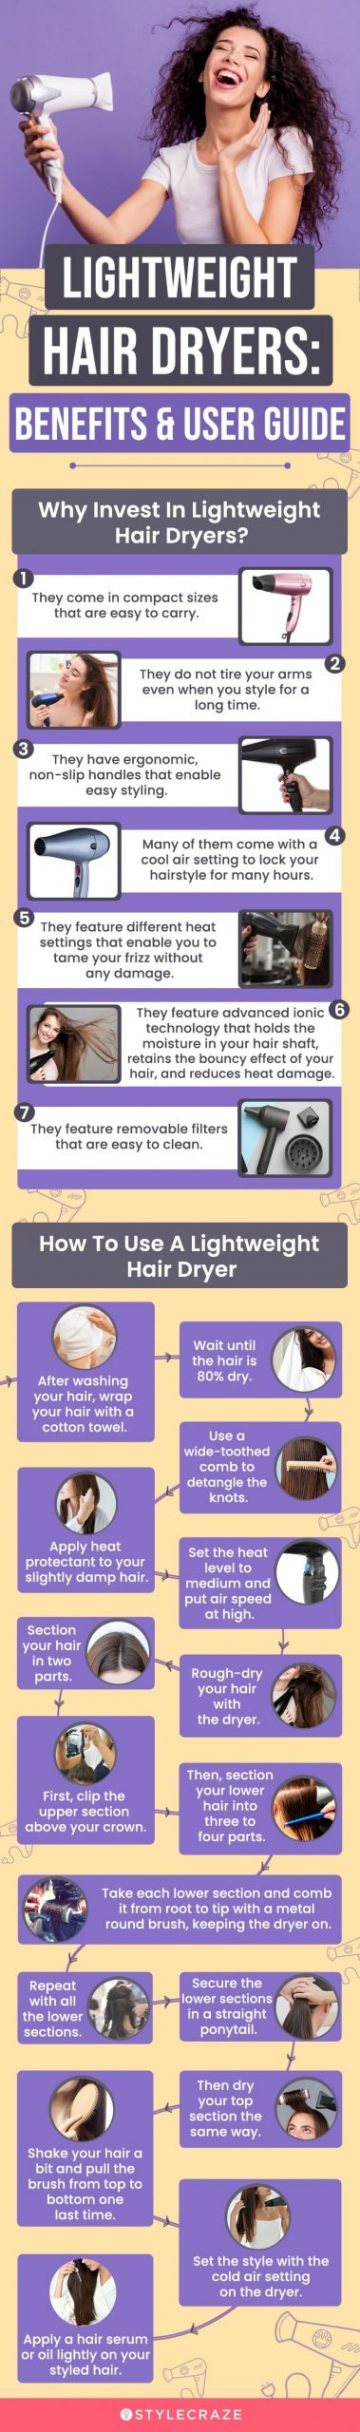 Lightweight Hair Dryers: Benefits & User Guide (infographic)